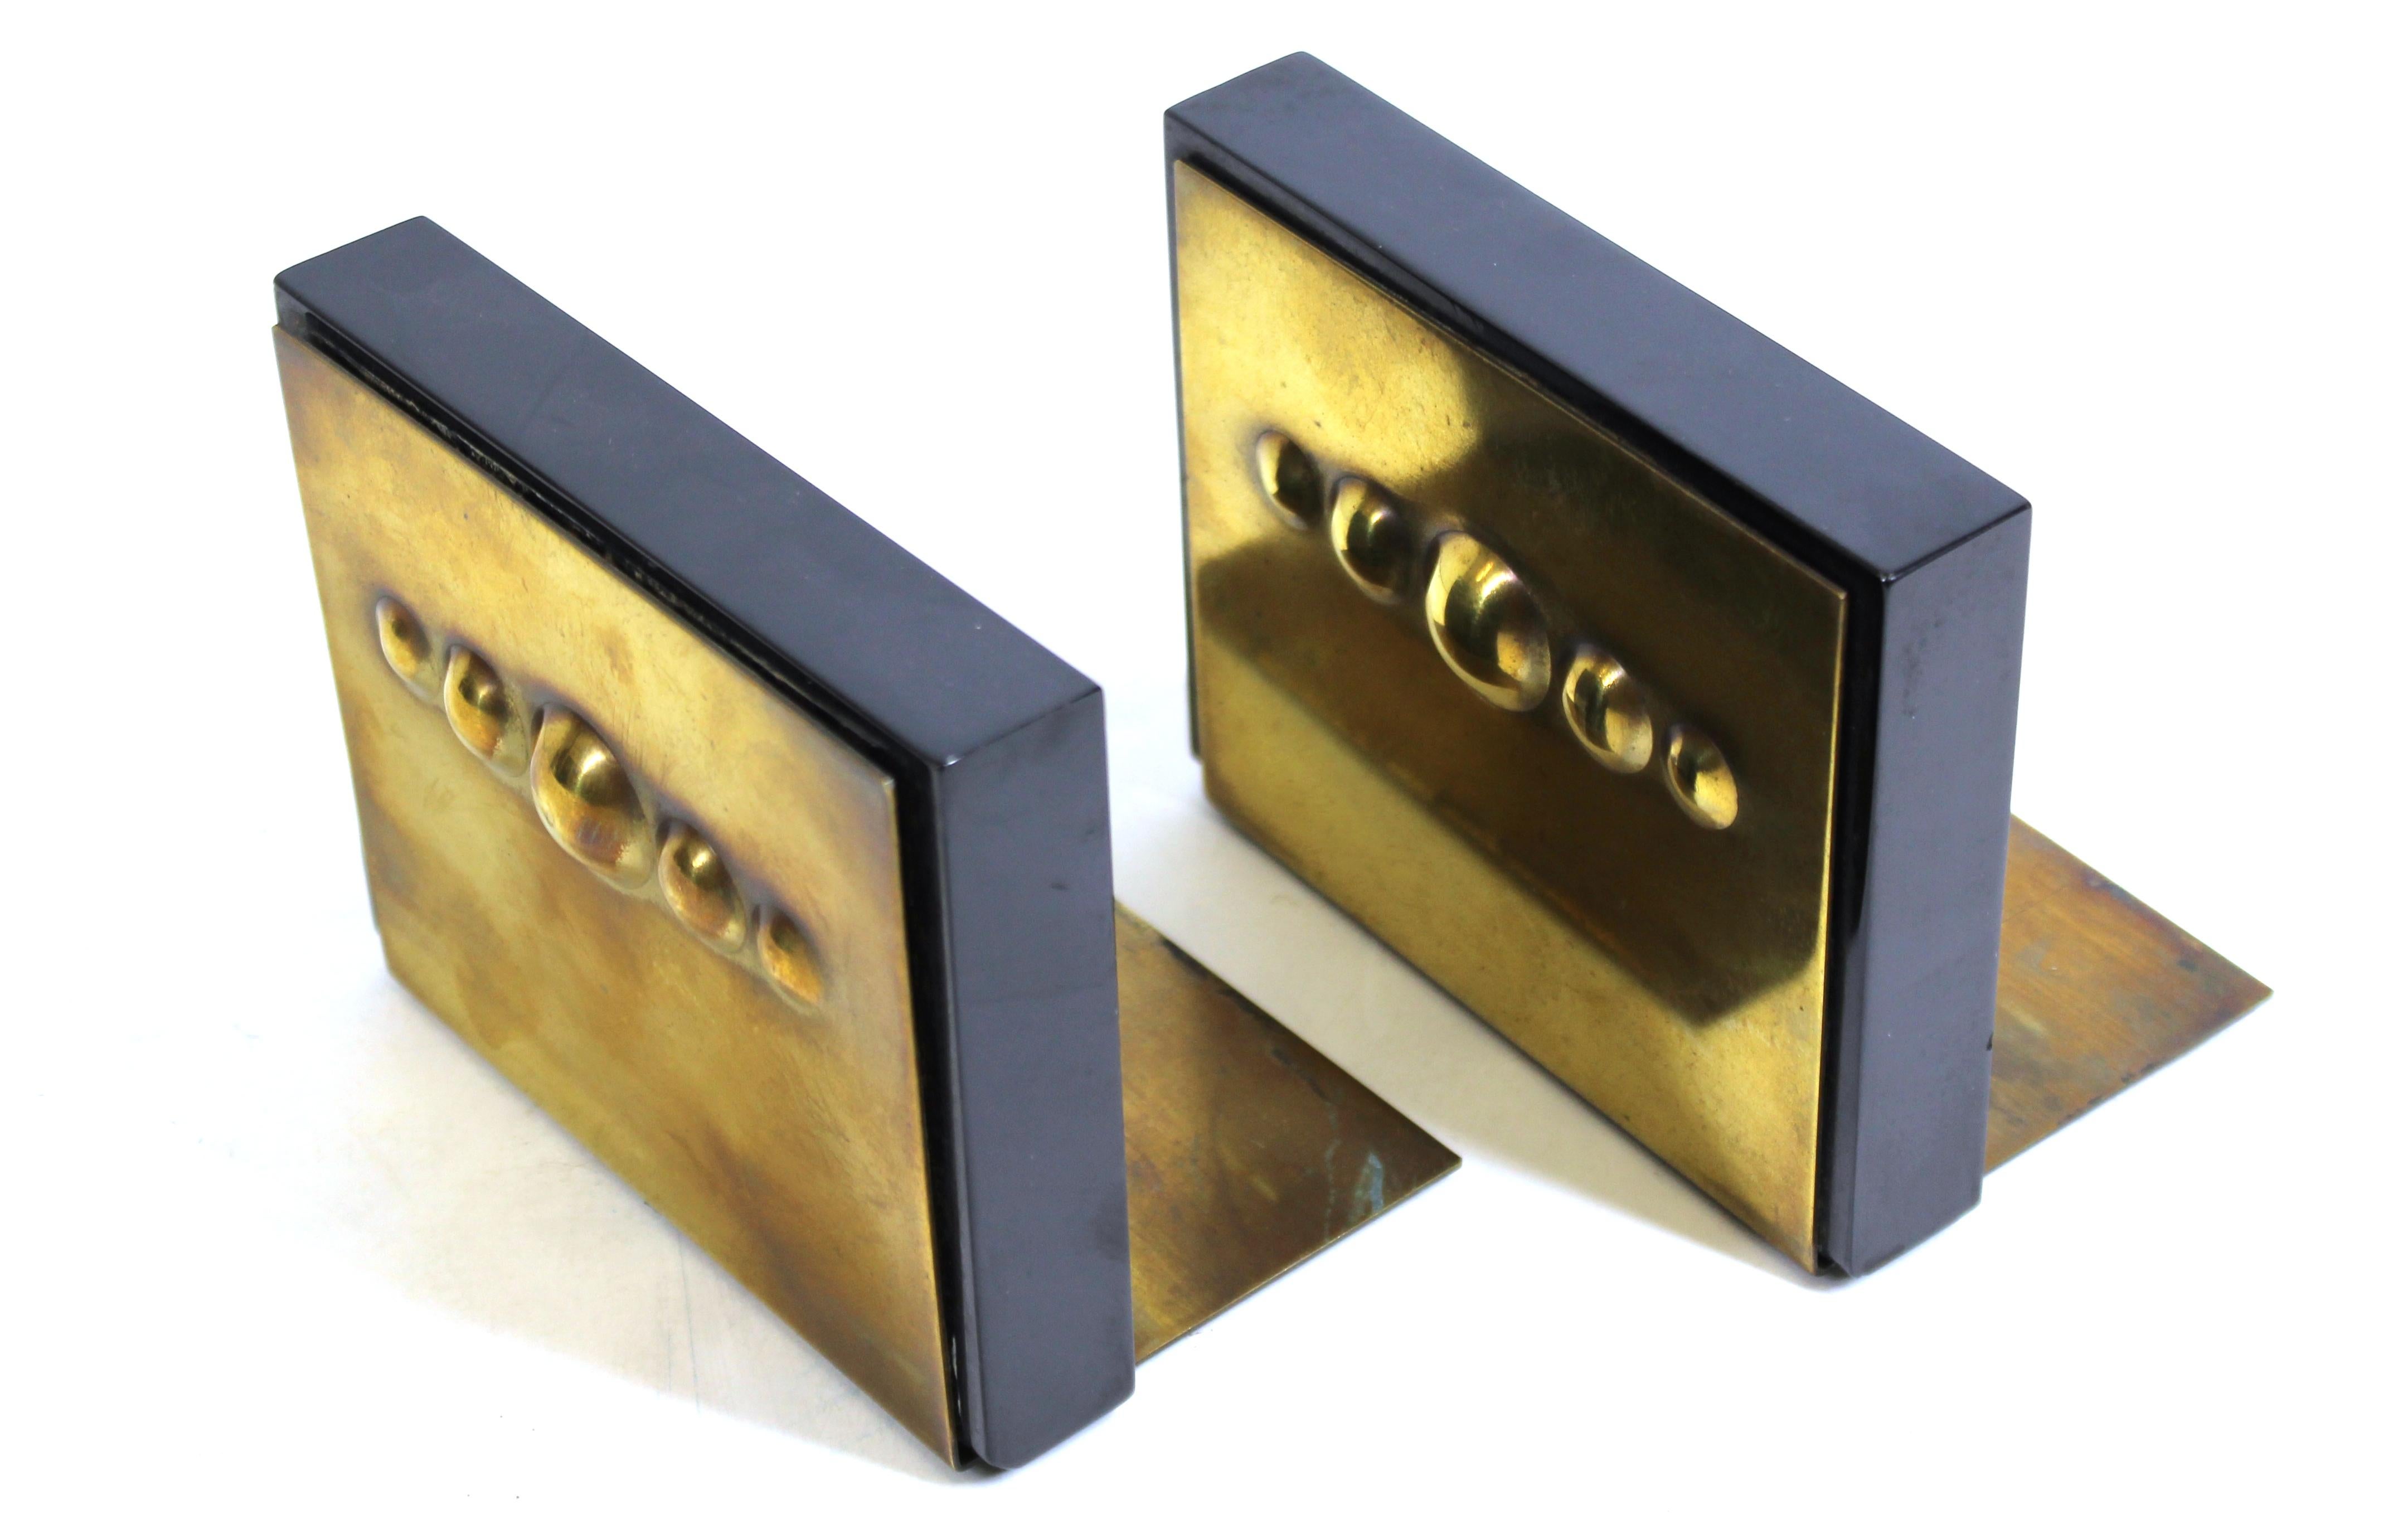 Art Deco American Modernist Bookends in Solid Bakelite and Brass